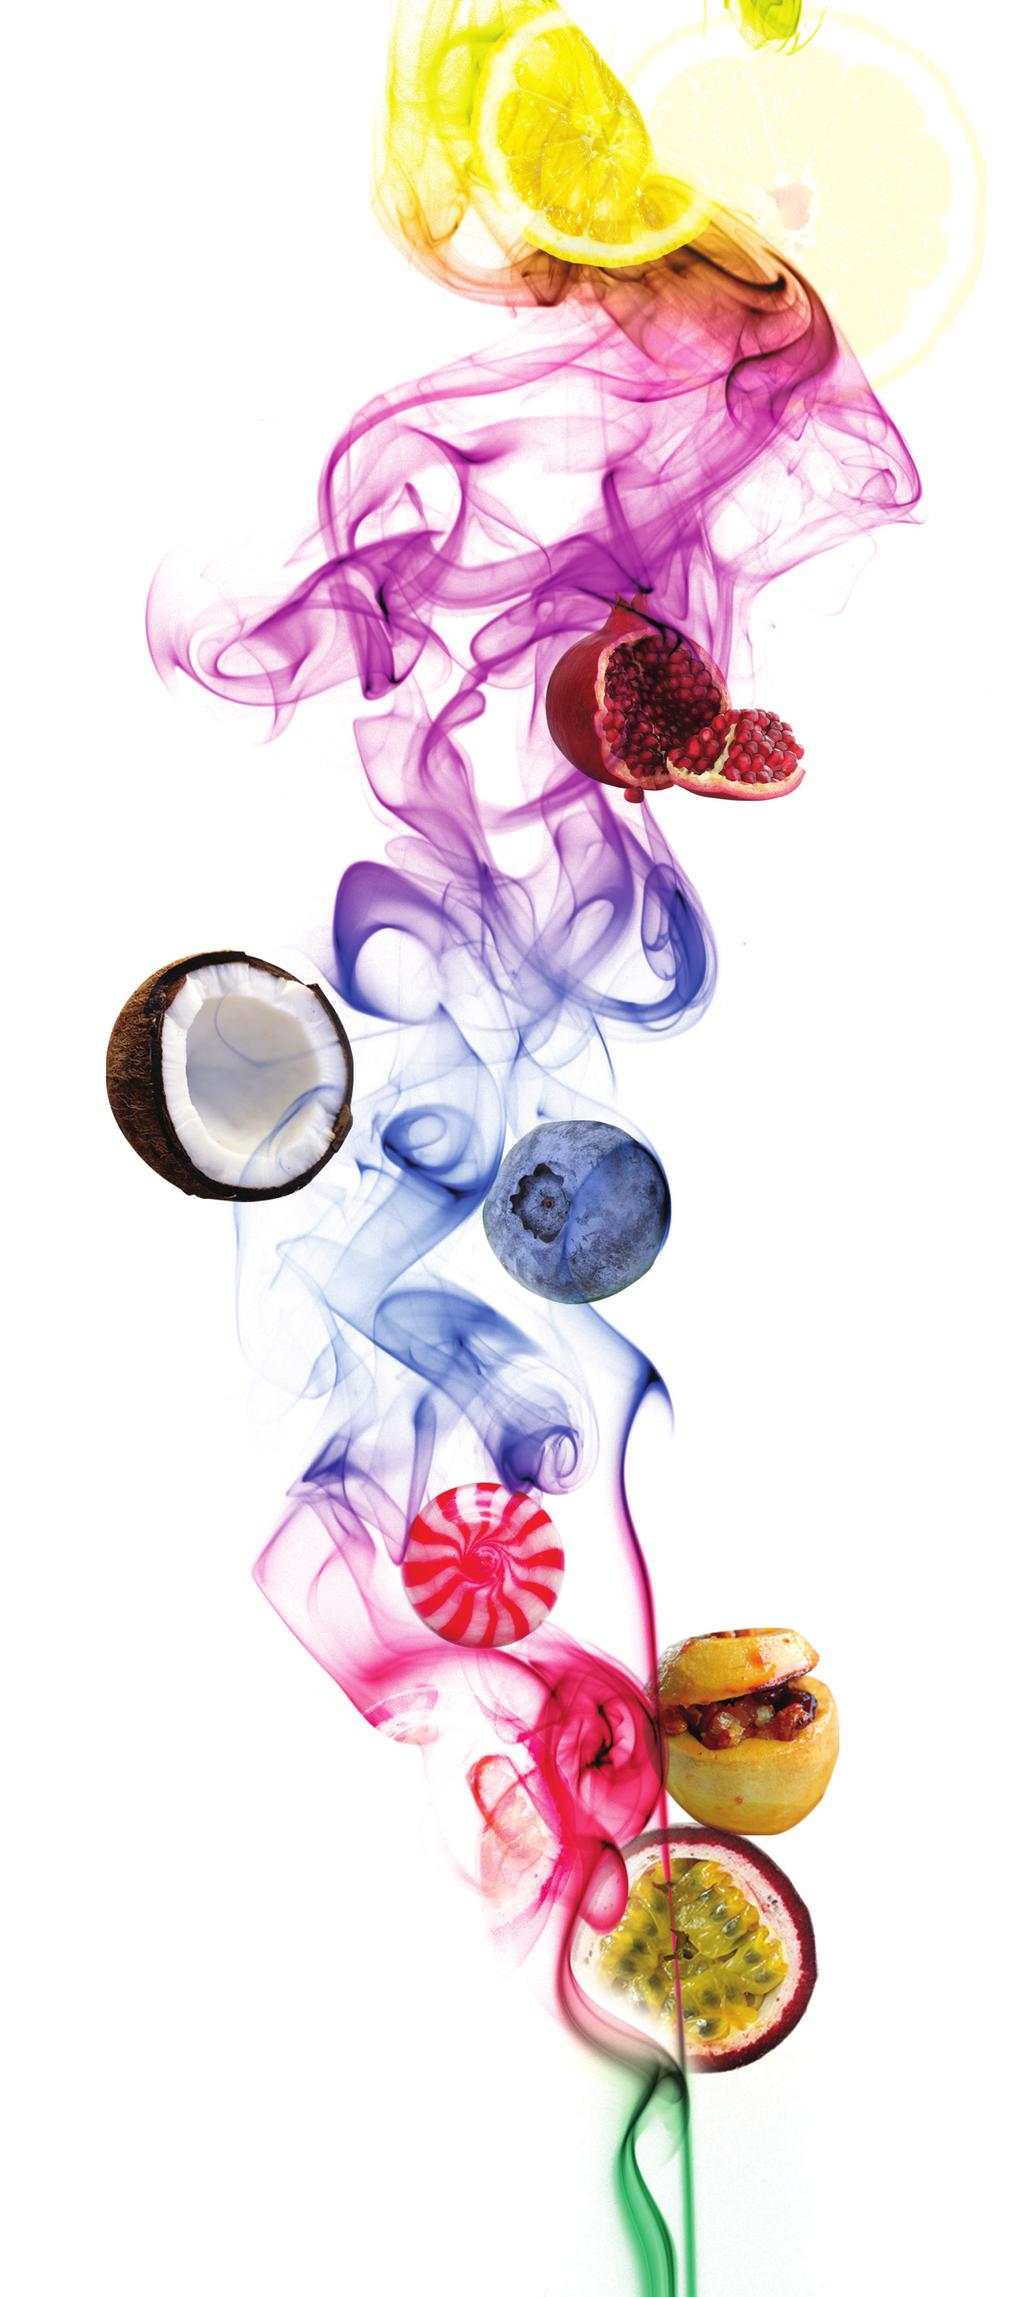 Aroma Systems & Essences The use of fragrance is another way to vary the effect of steam on the senses from calm